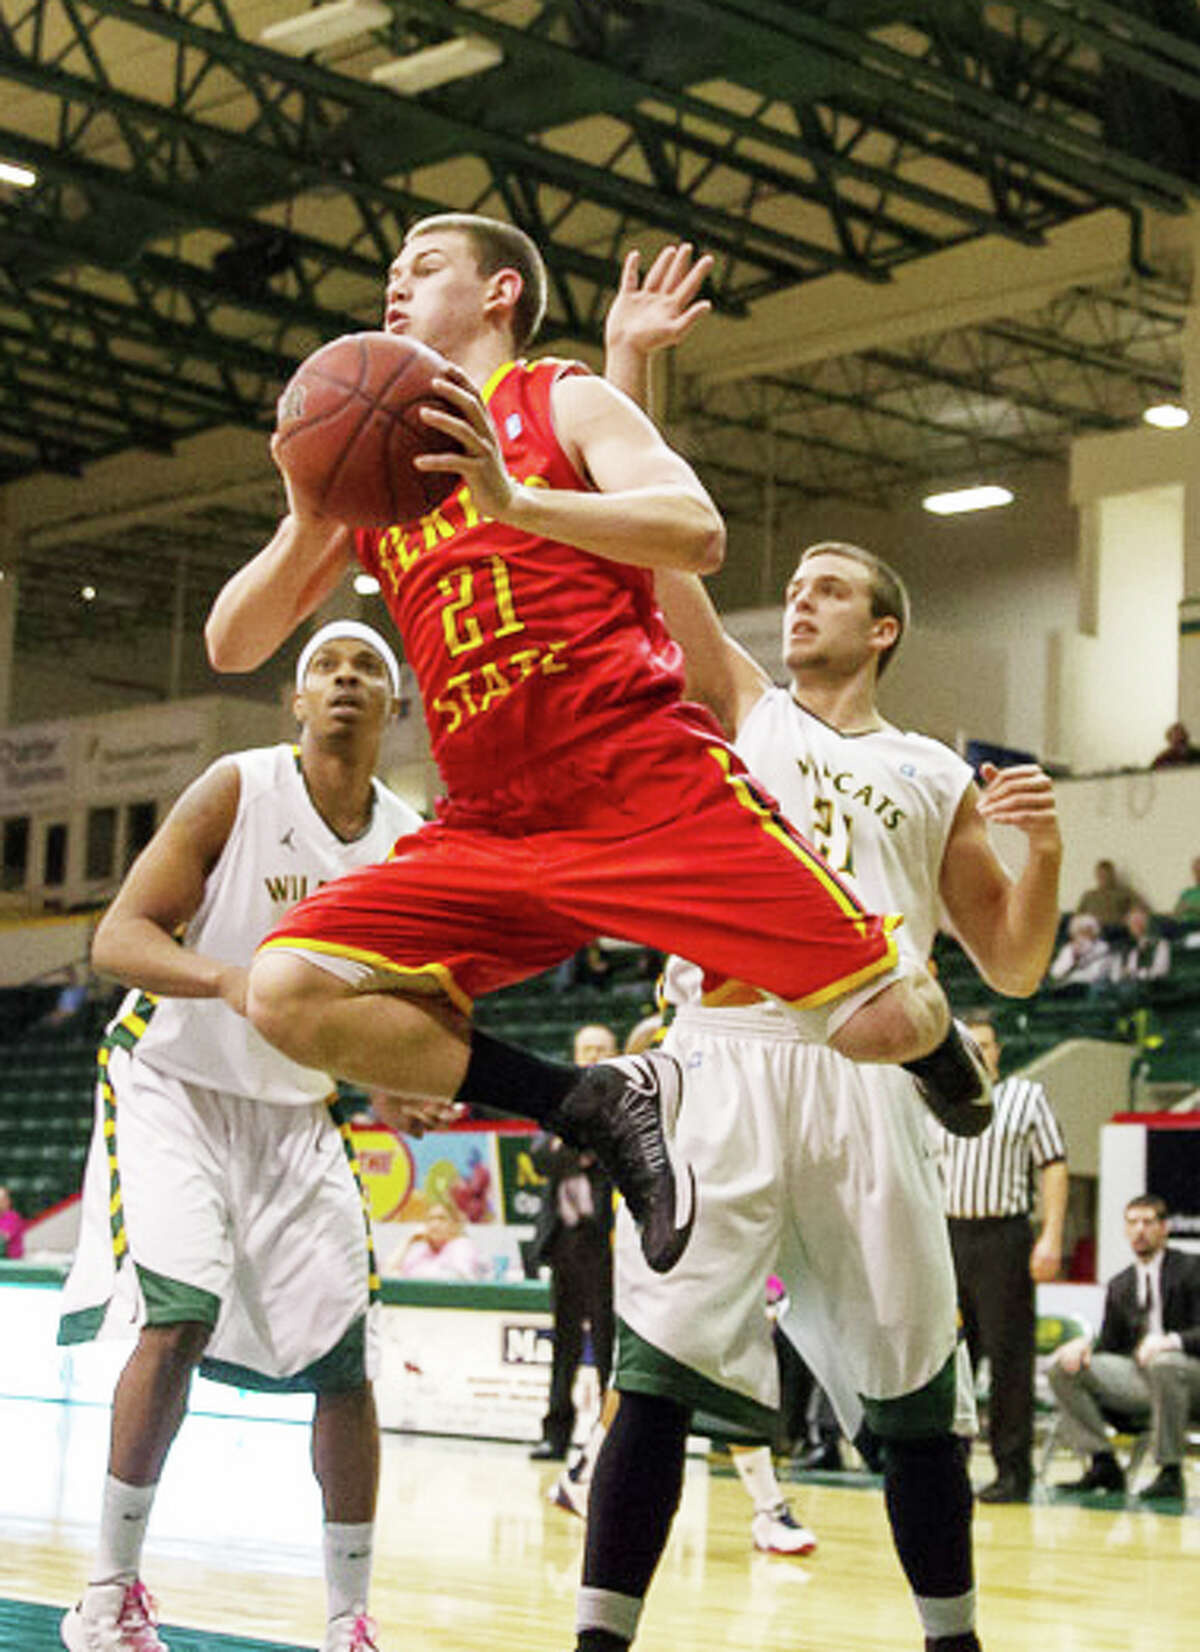 UP IN THE AIR: Ferris State sophomore Drew Lehman looks for someone to pass to during the Bulldog’s 69-63 win Saturday over Northern Michigan. (Courtesy Photo/Ferris State Ben Amato)